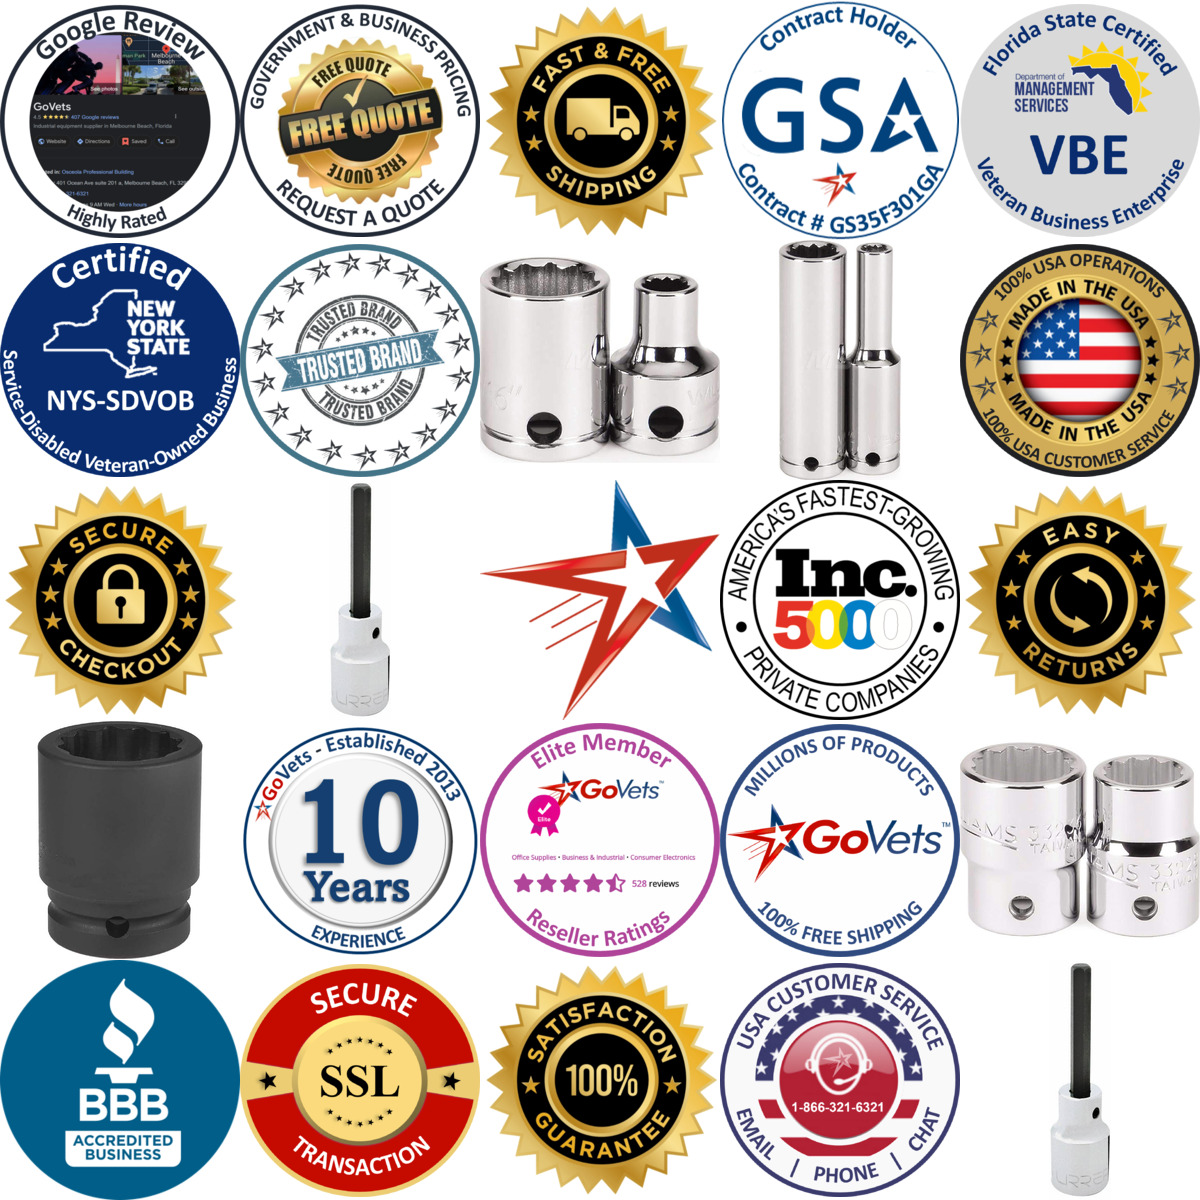 A selection of Punches products on GoVets